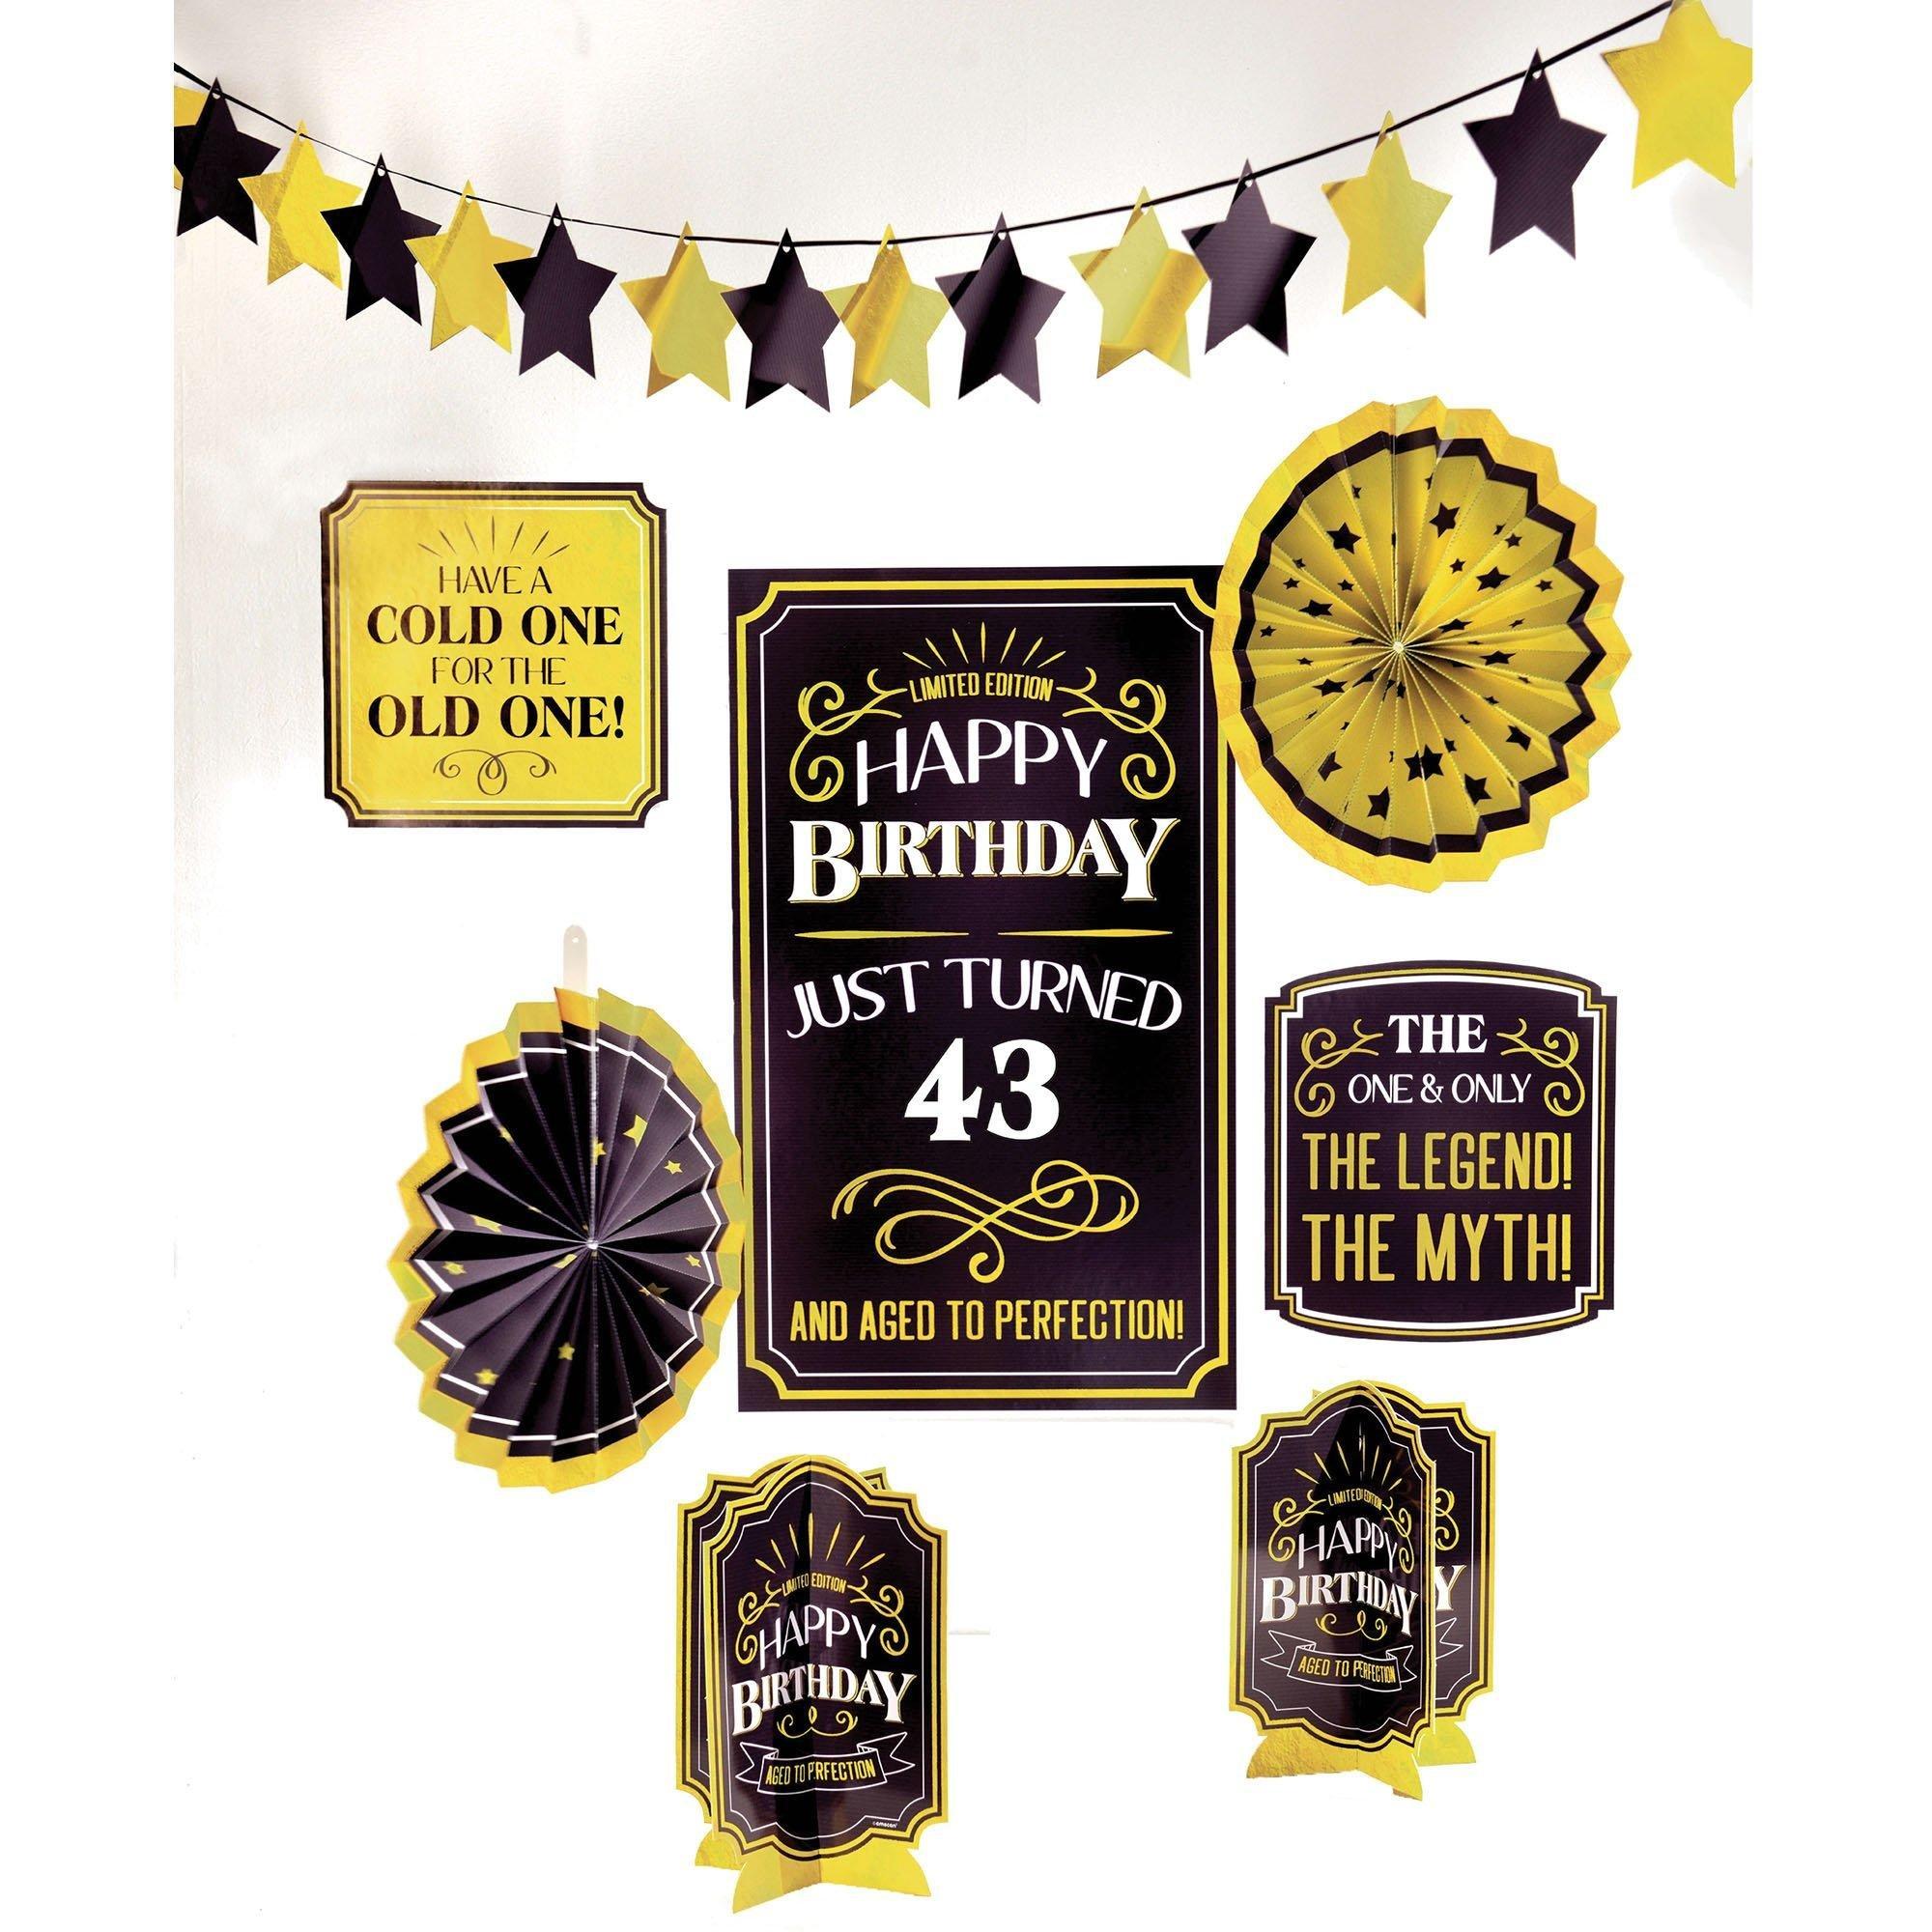 Birthday sign - Happy 50th birthday. Hollywood birthday party decorations,  50 year old birthday, Gatsby roaring 20s party supplies, art deco